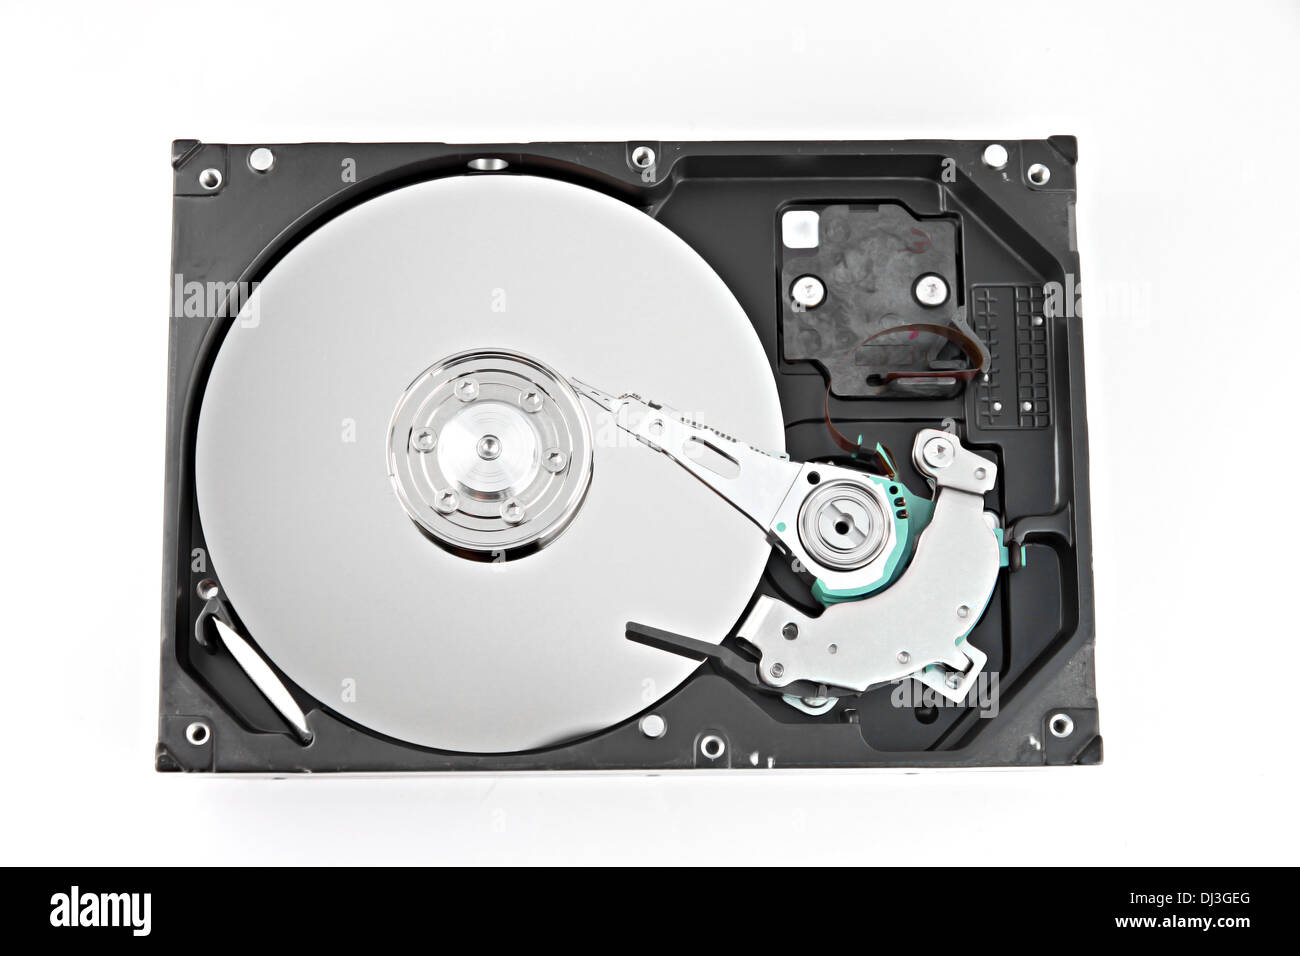 The open Hard disk and focus picture in Disk storage. Stock Photo